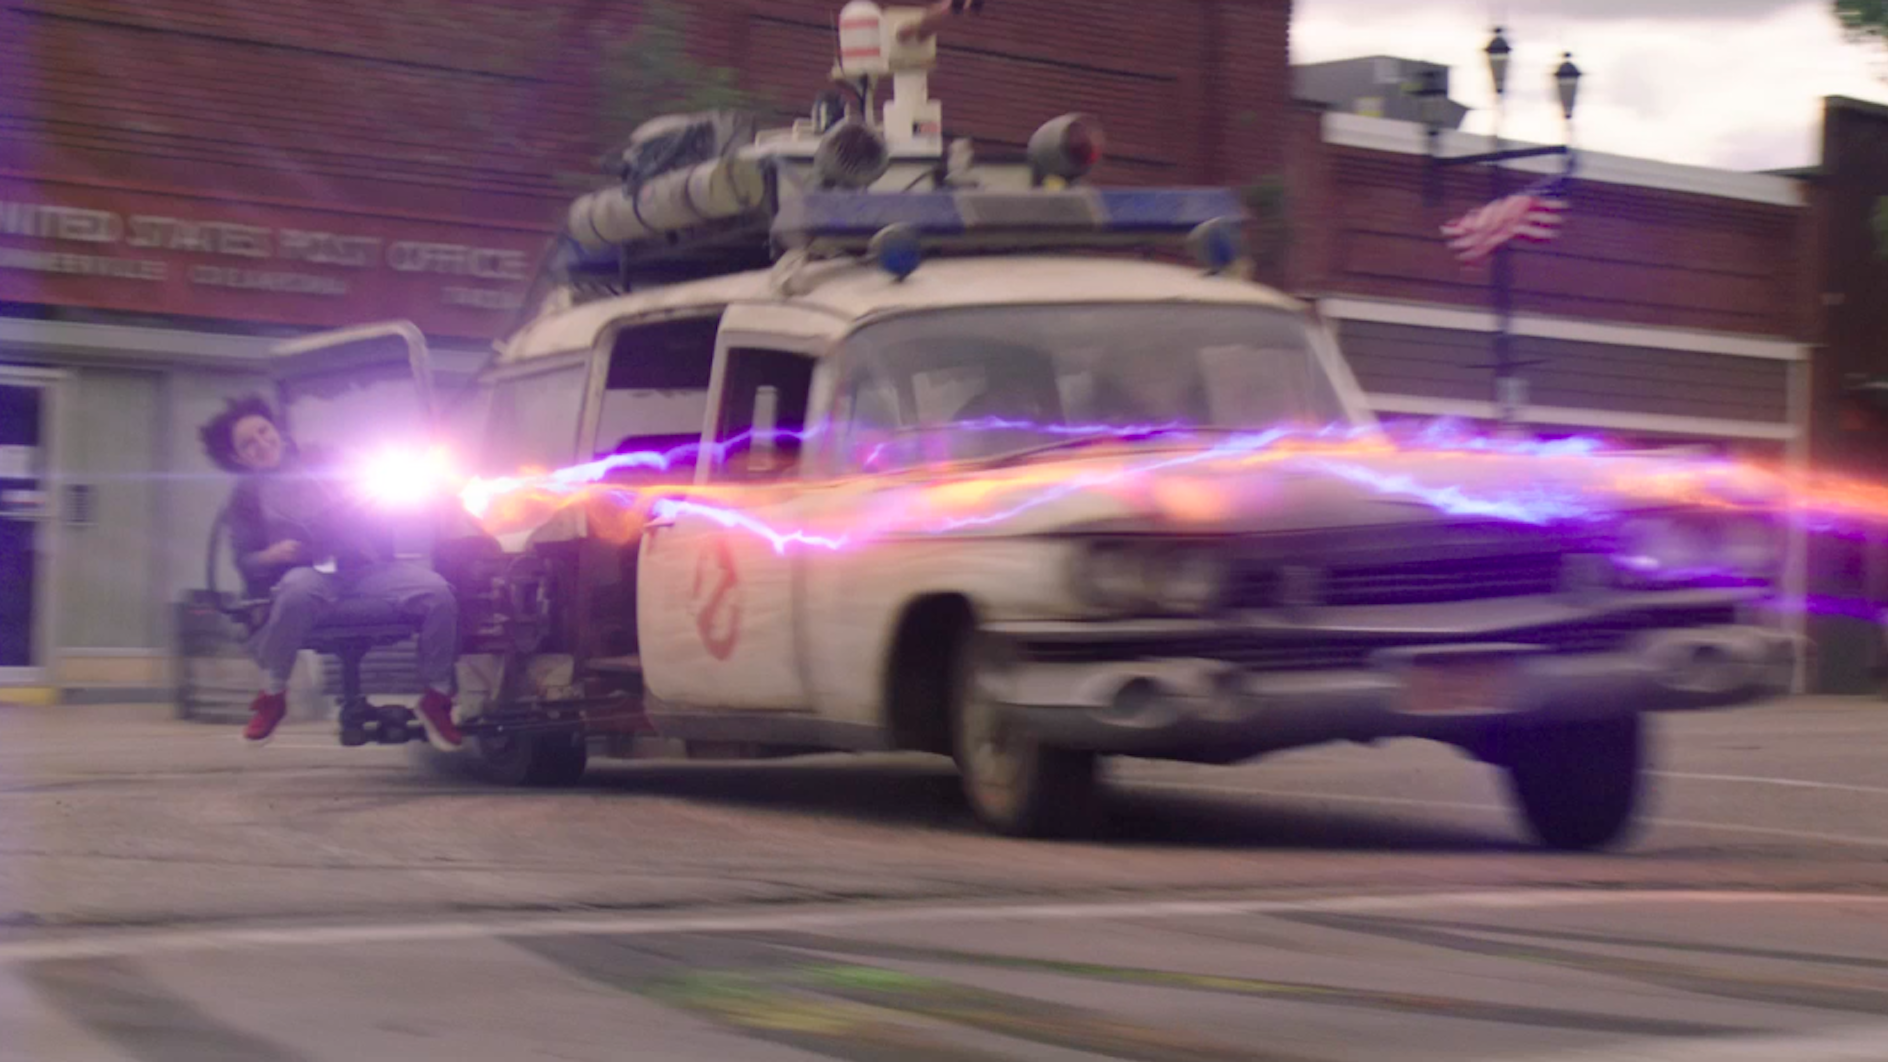 ‘Ghostbusters: Afterlife’ brings Ghostbusting to the countryside